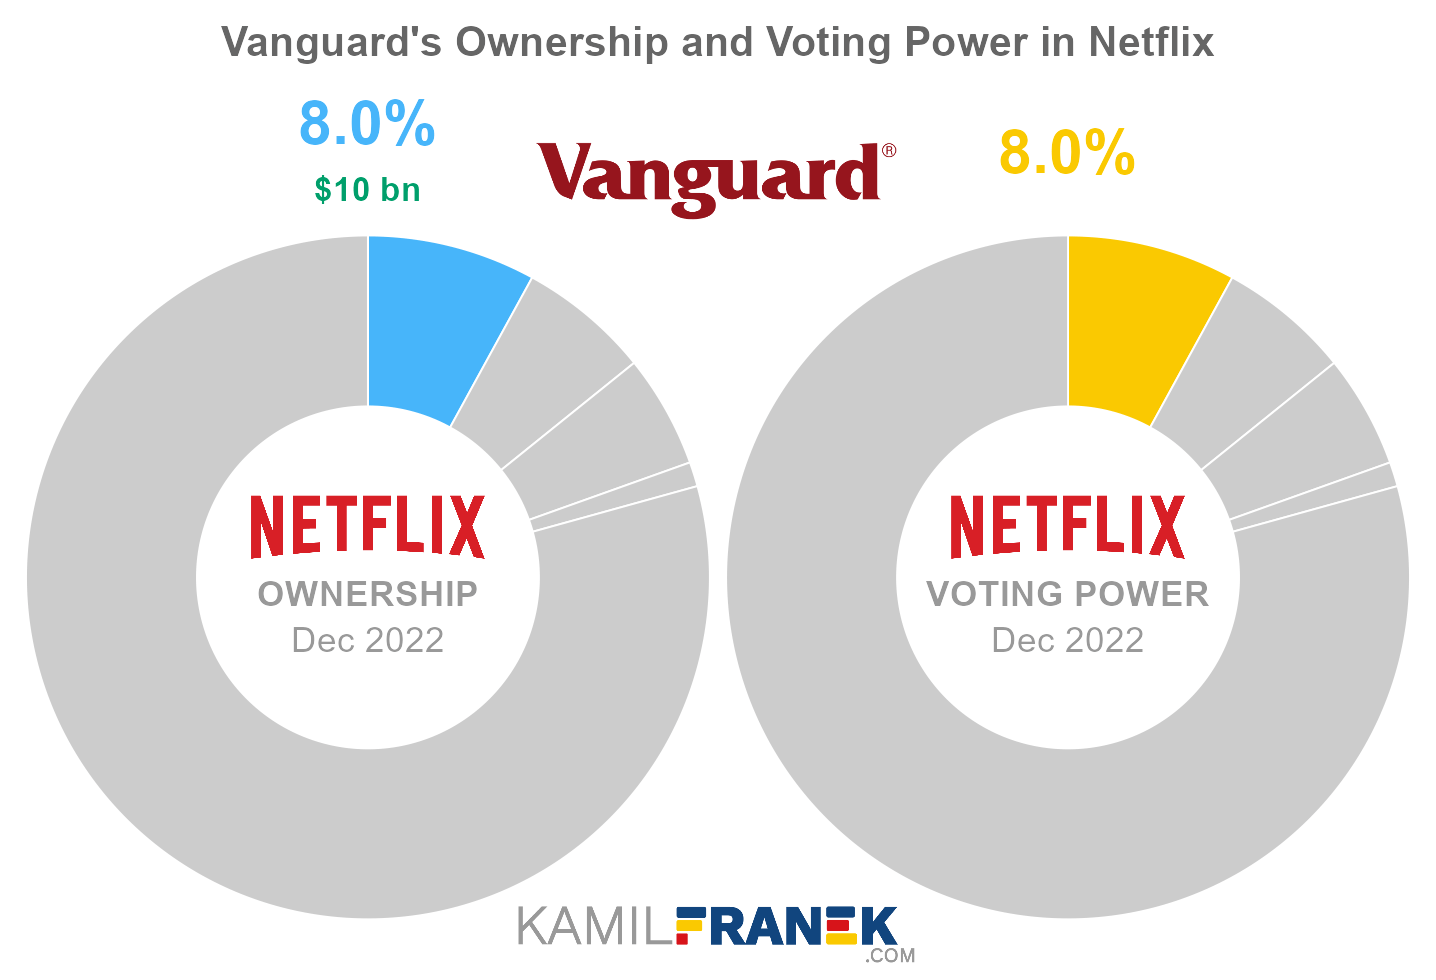 Netflix largest shareholders share ownership vs vote control chart